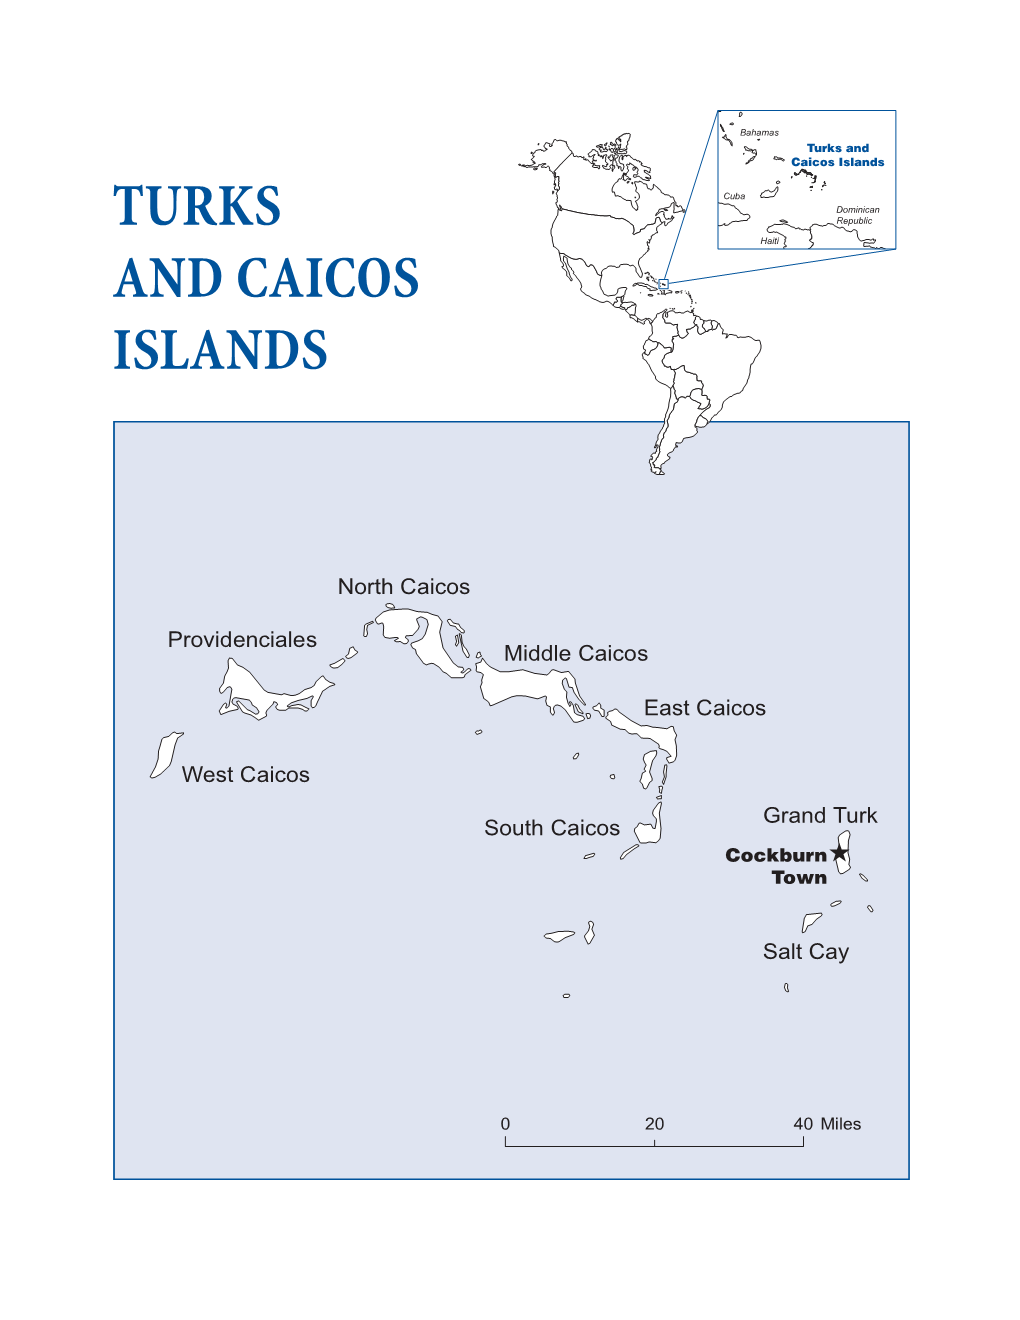 Turks and Caicos Islands Country Profile Health in the Americas 2007